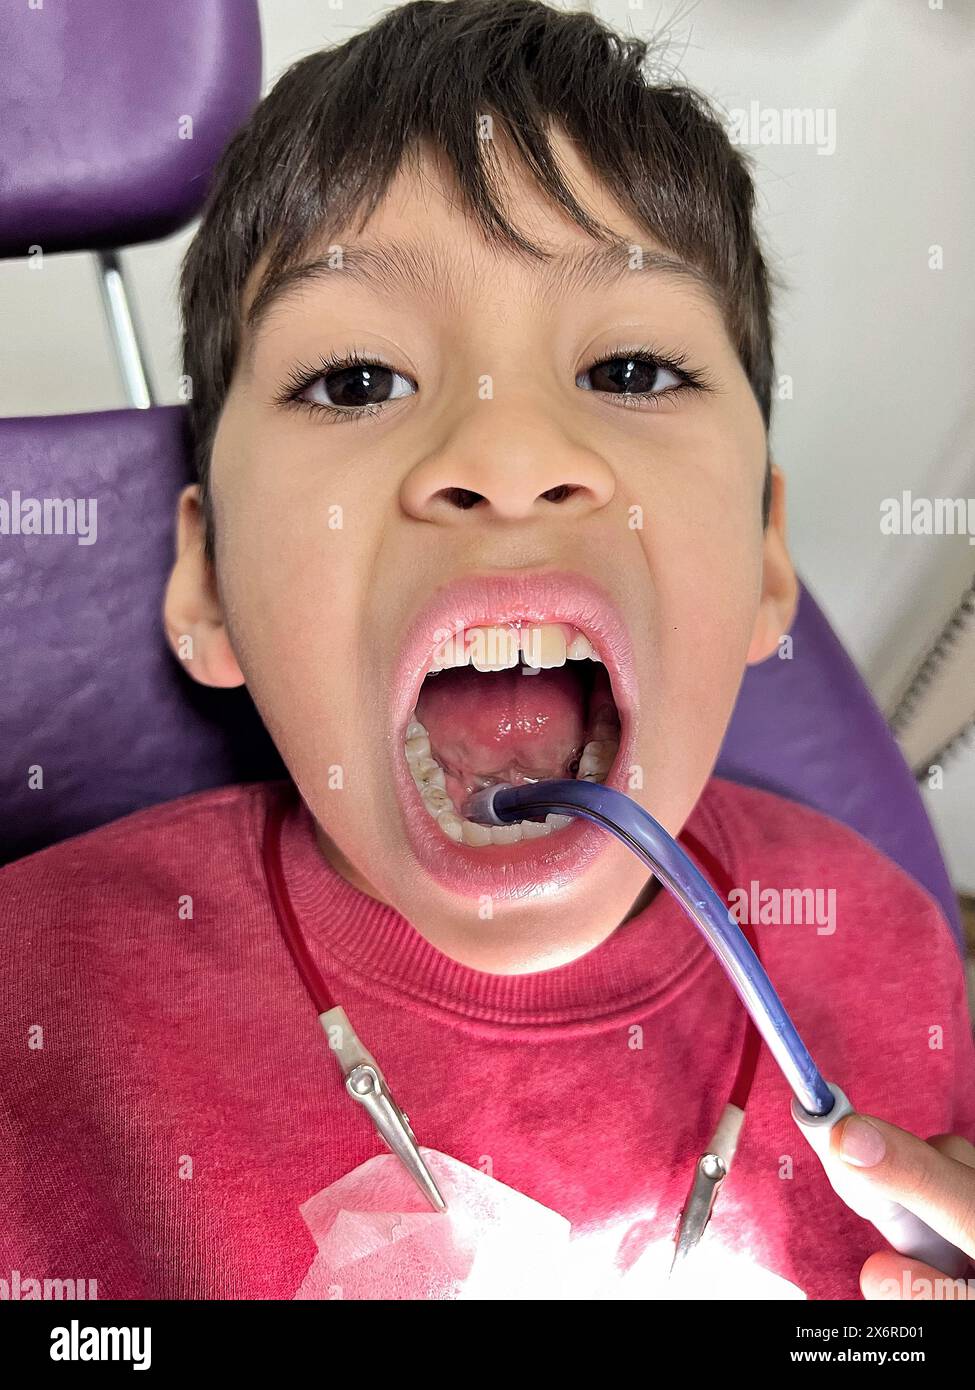 latino child looking at the camera with his mouth open and a hose to swallow saliva at the pediatric dentist for cavity fixes Stock Photo